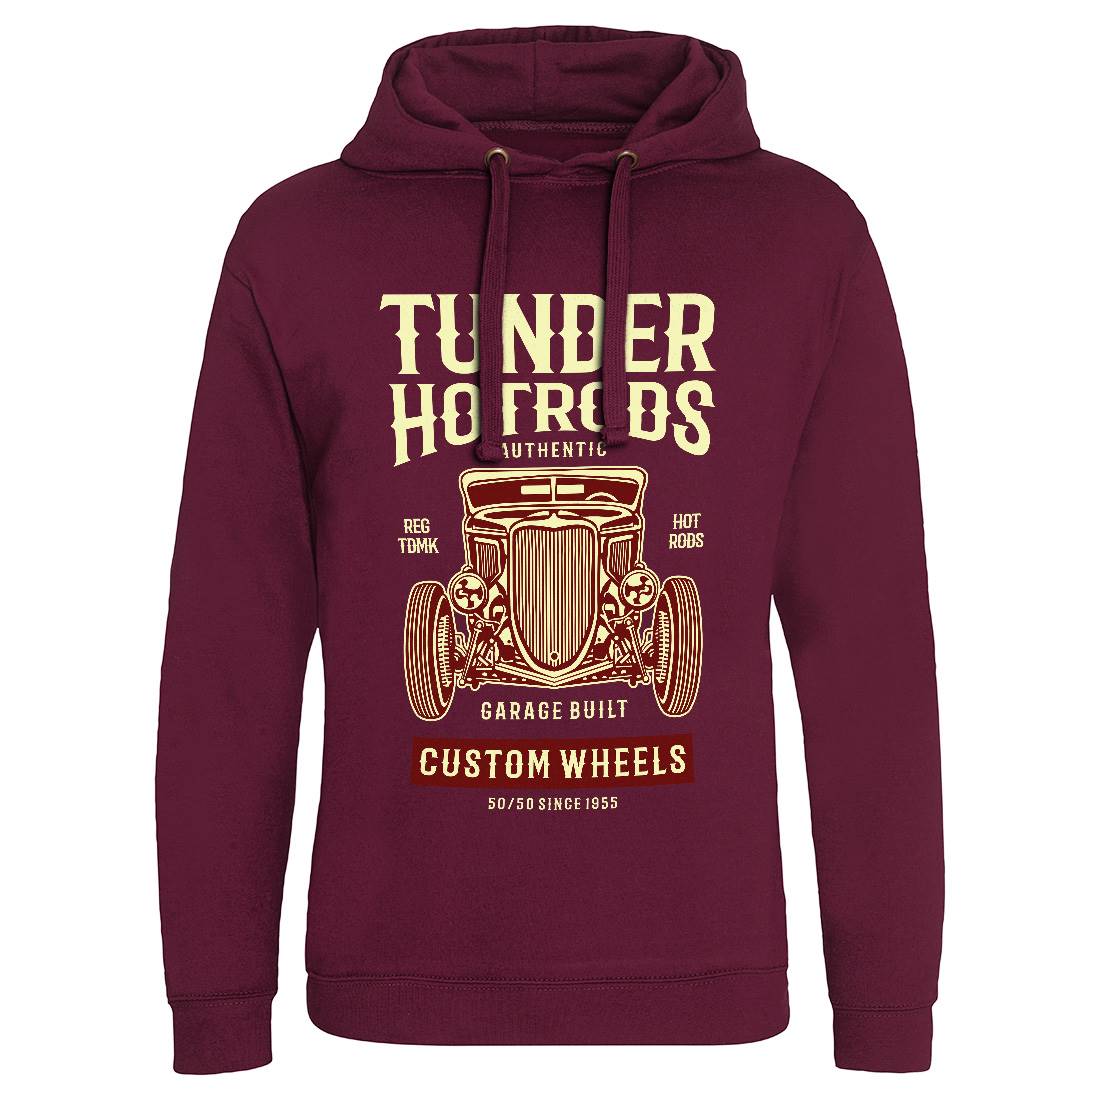 Thunder Hot Rods Mens Hoodie Without Pocket Cars B266